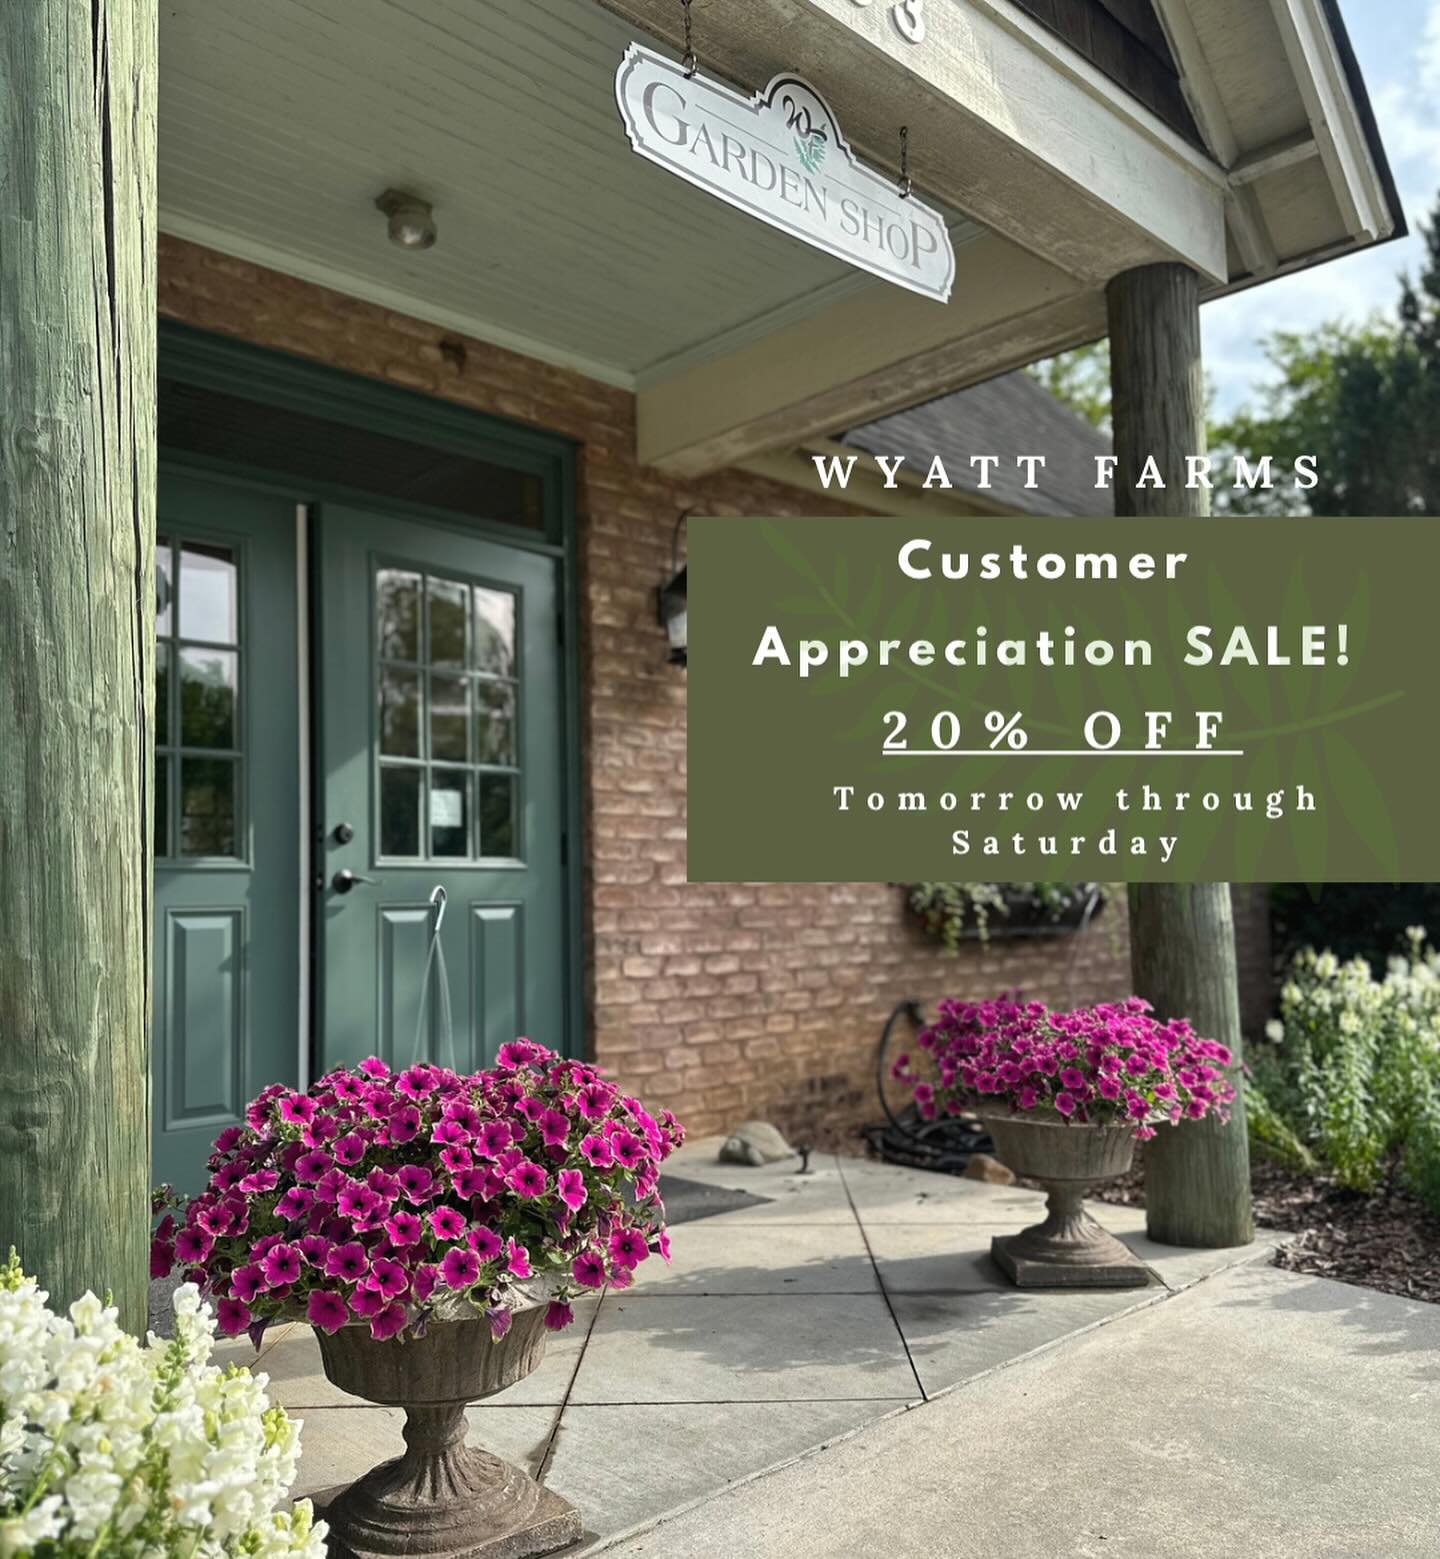 OUR SALE BEGINS TOMORROW!!! 20% off your purchase!! Browse our selection of blooming annuals, shrubs, gifts, houseplants, and more this weekend🌟

Pssstttt.. a little sweet treat and bubbles may be in store for you as well 😉

Sale days : 
&bull;Tomo